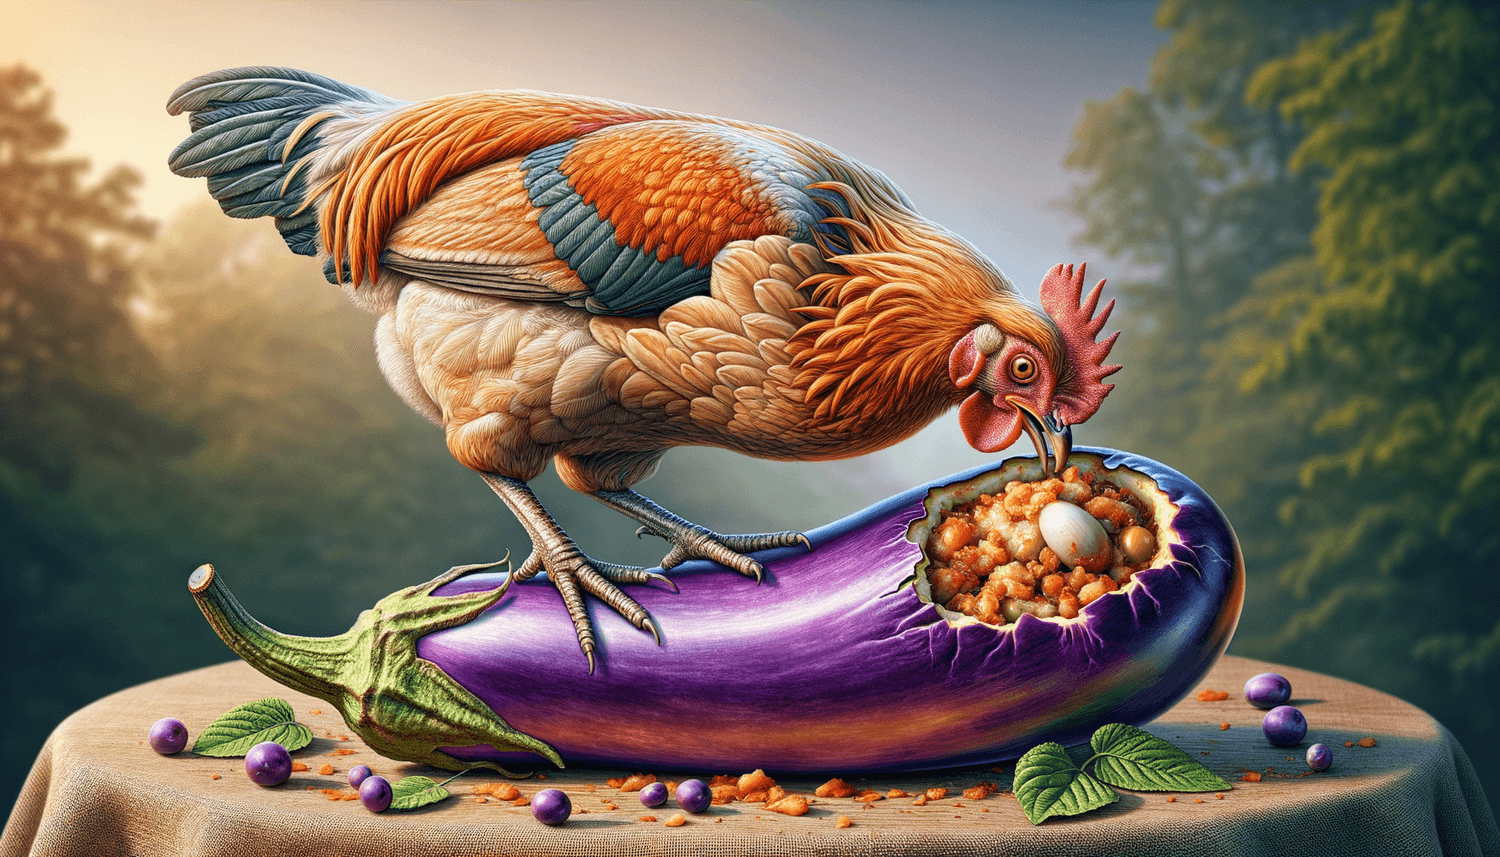 Can Chickens Eat Eggplant Skin?